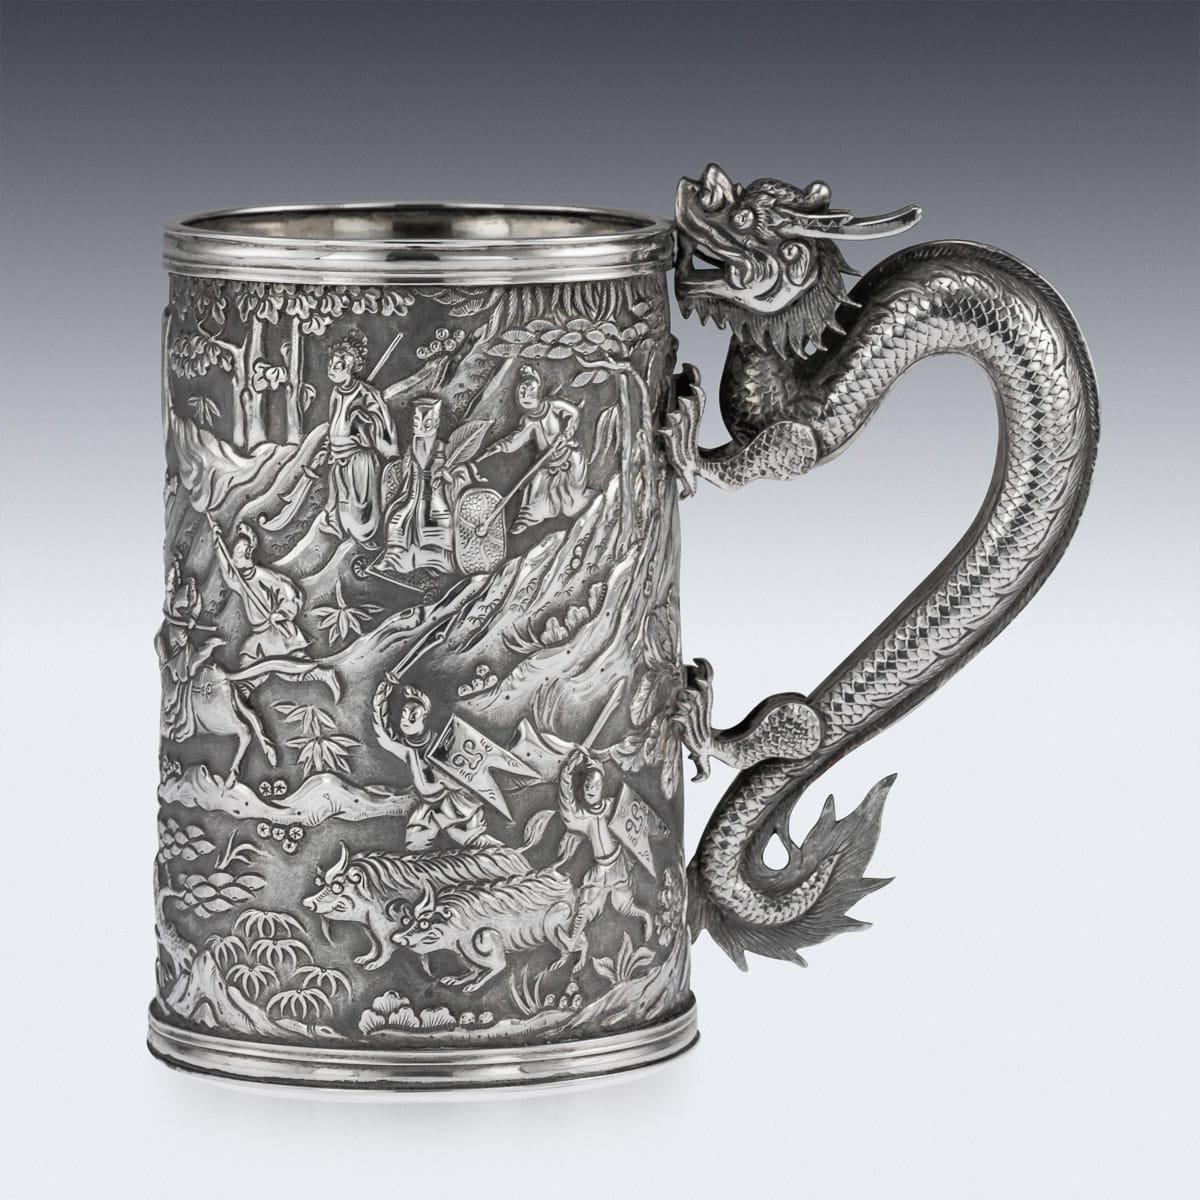 Antique late 19th century Chinese export solid silver mug, of traditional shape and large size, the body is embossed with beautiful battle scenes in relief depicting Chinese warriors fighting amongst forest landscape, double walled, the front